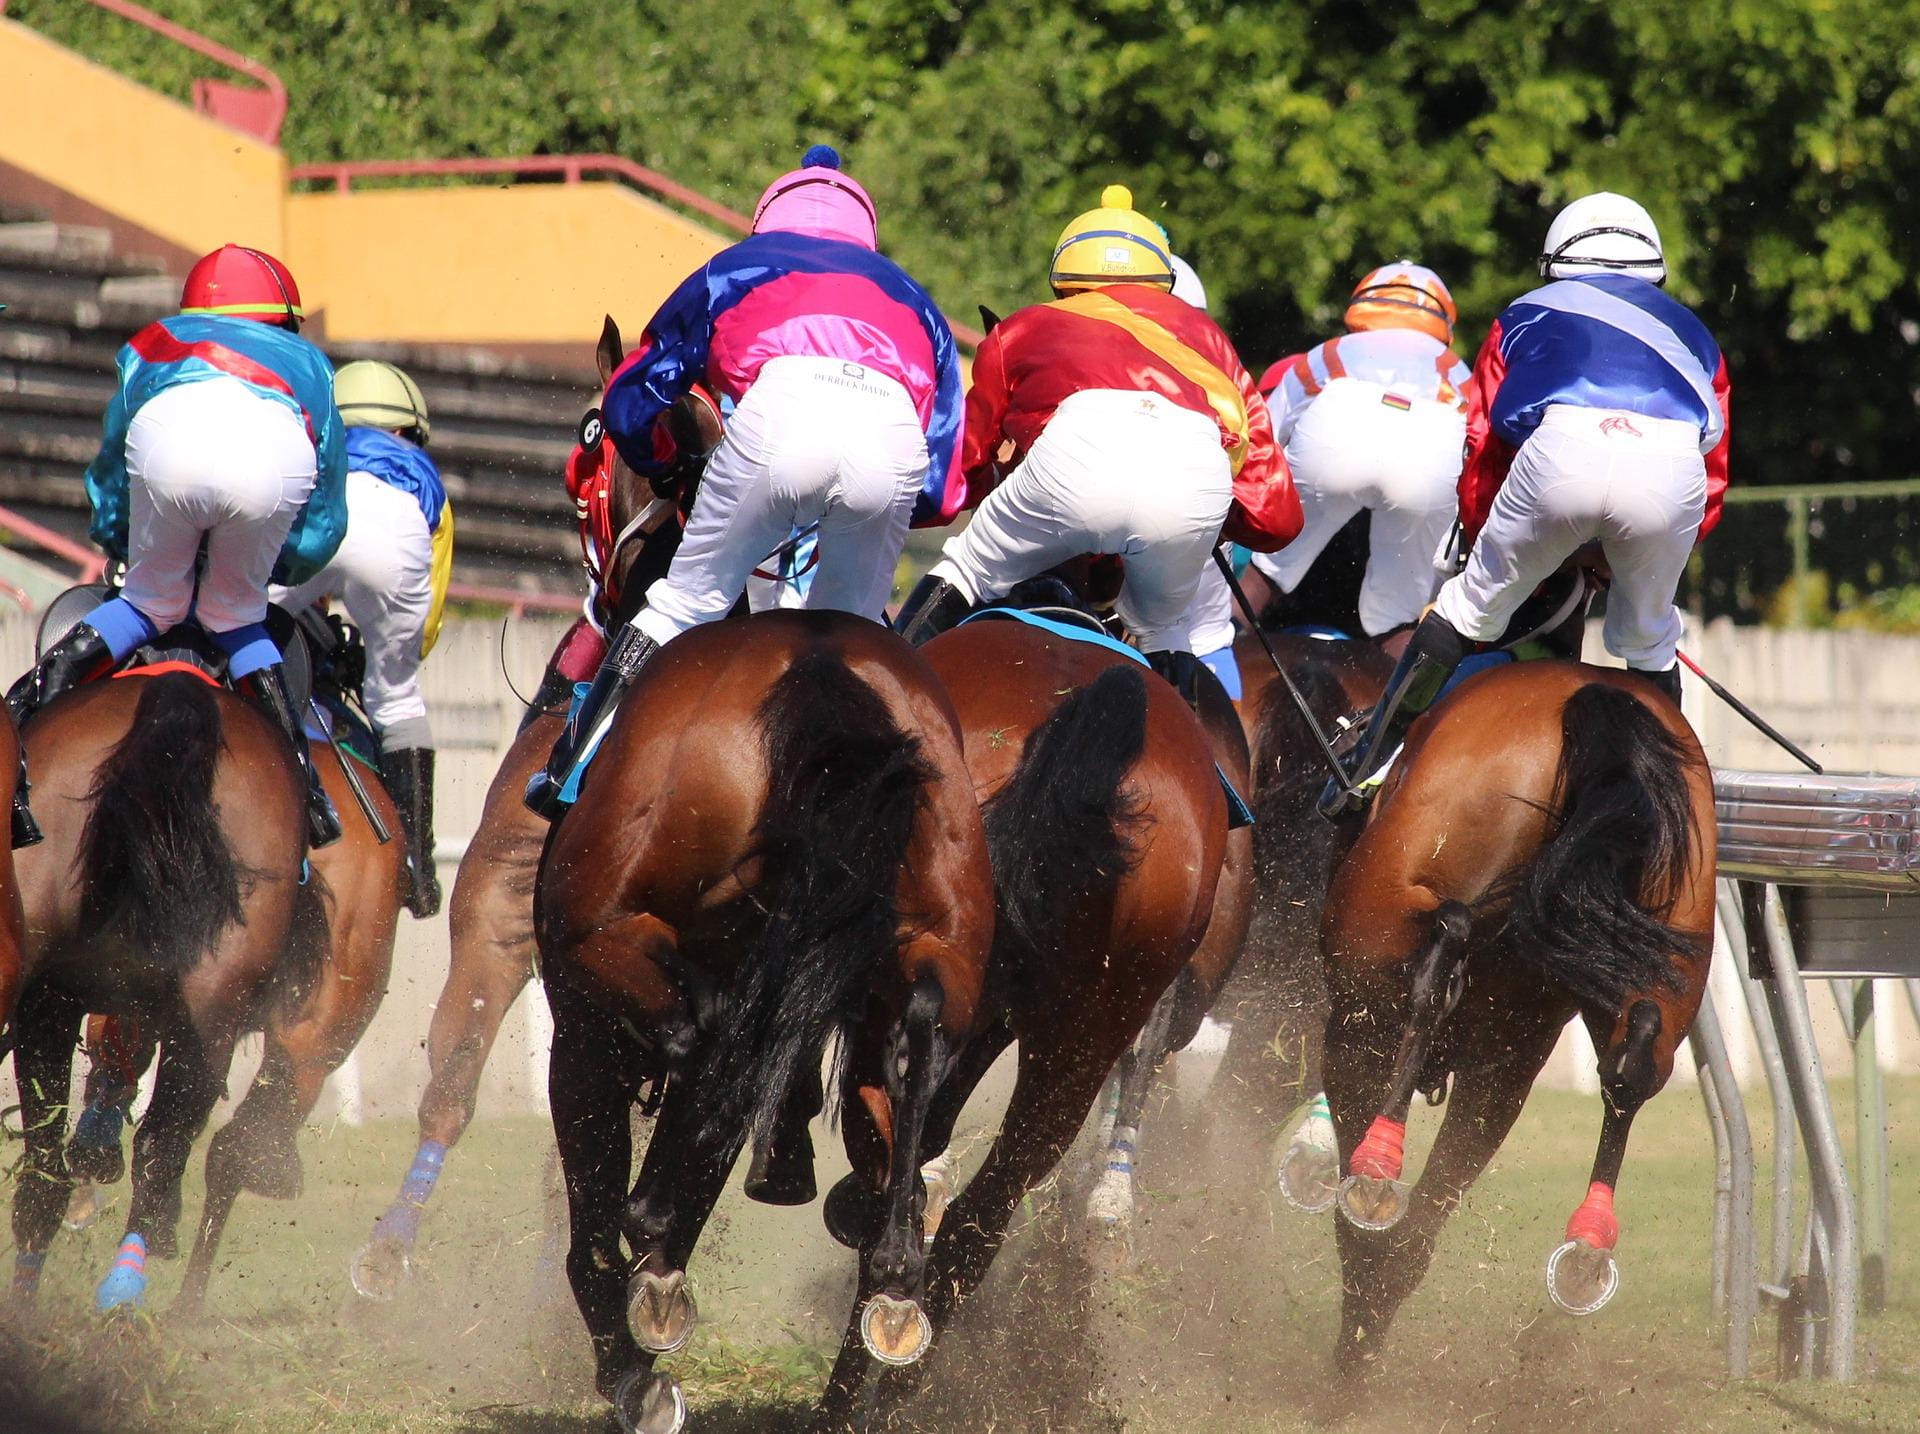 Several horses are racing on a track with jockeys in bright colours